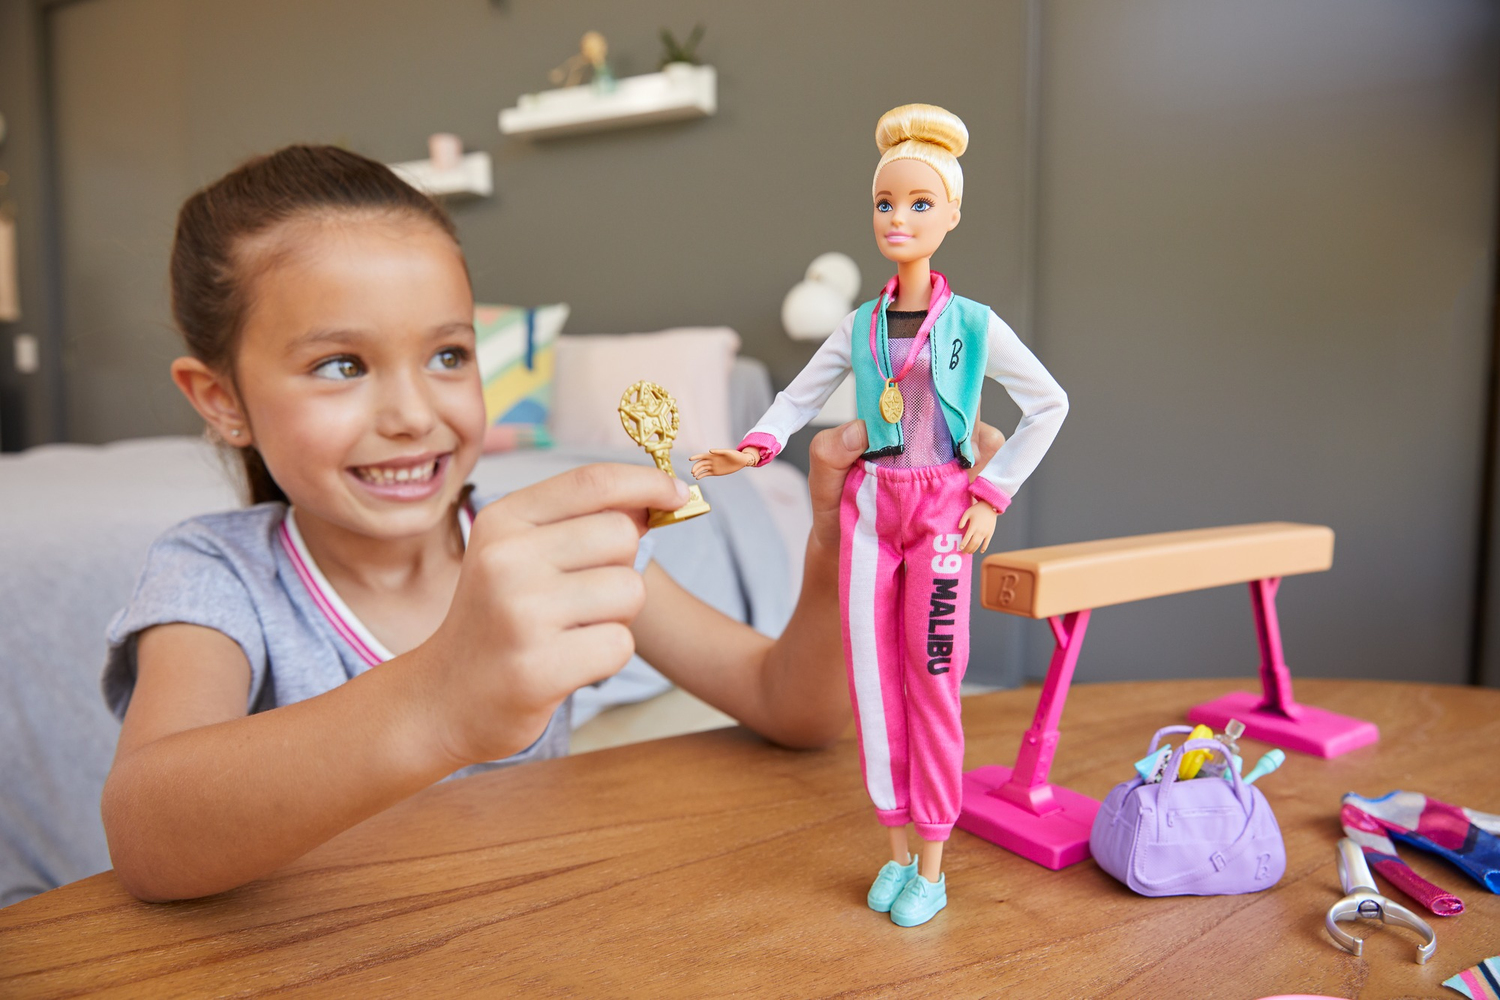 Barbie Doll And Accessories - GJM72